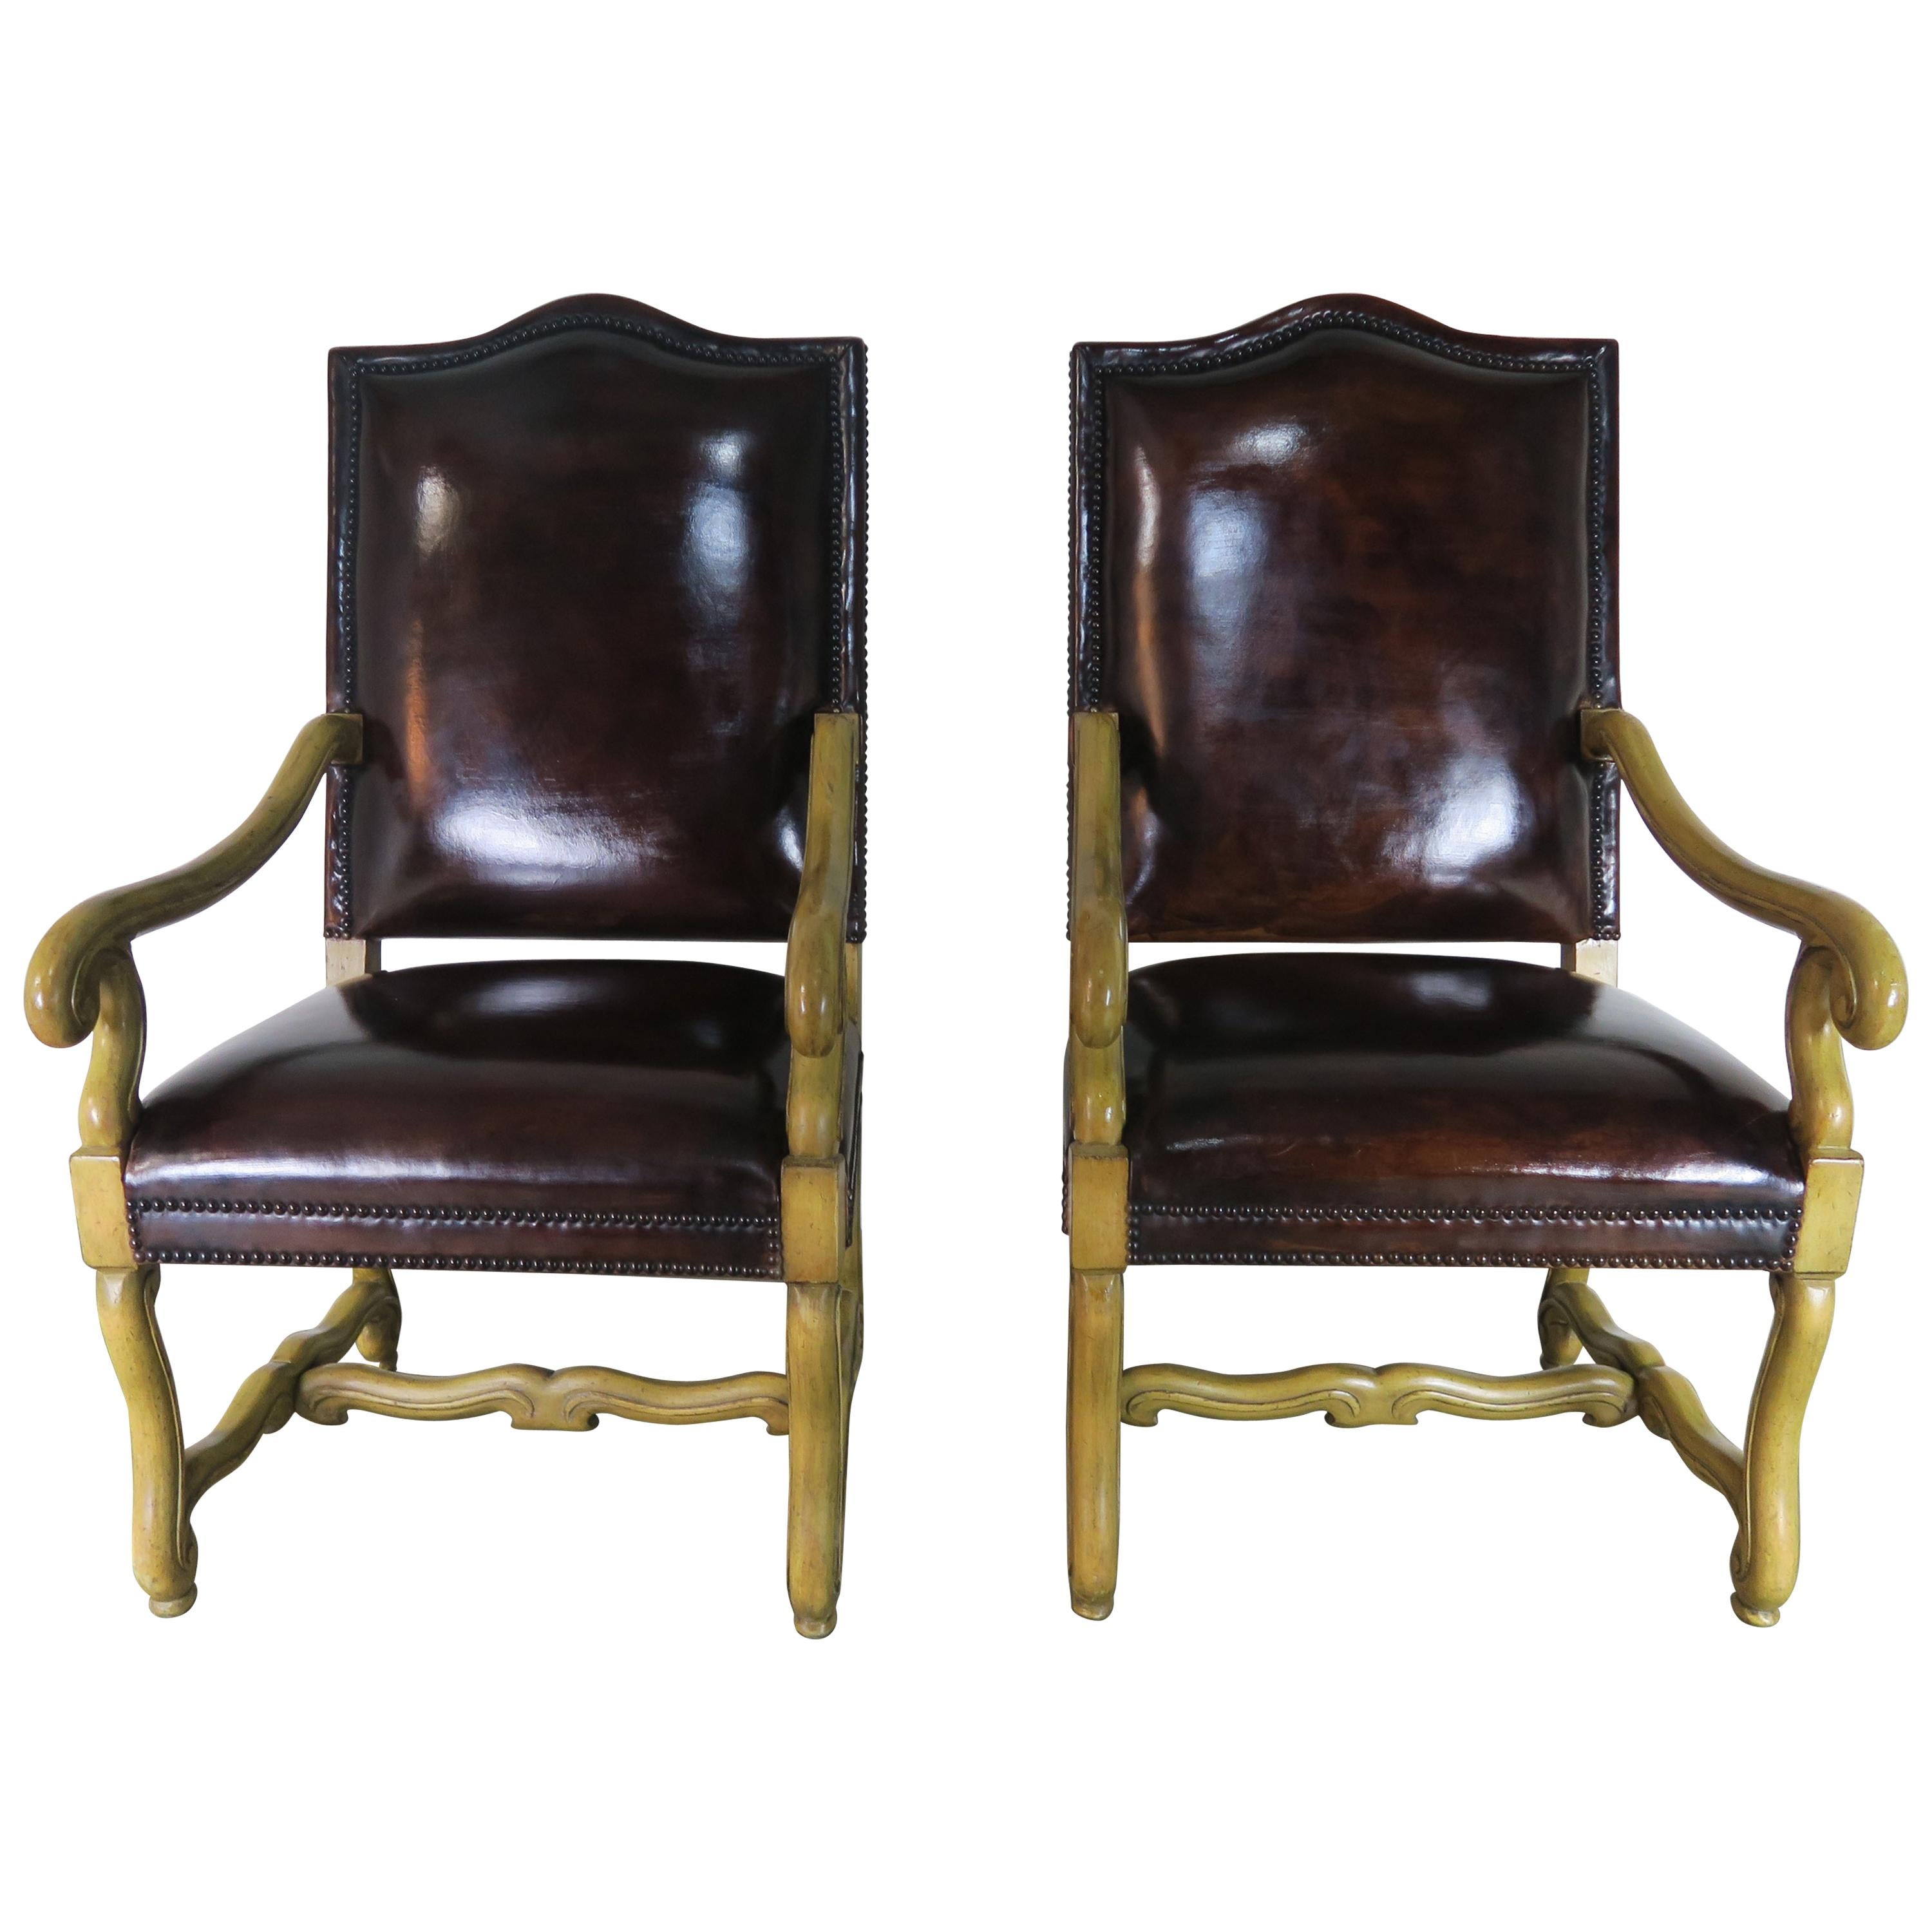 Italian Tuscan Style Leather Upholstered Armchairs, Pair